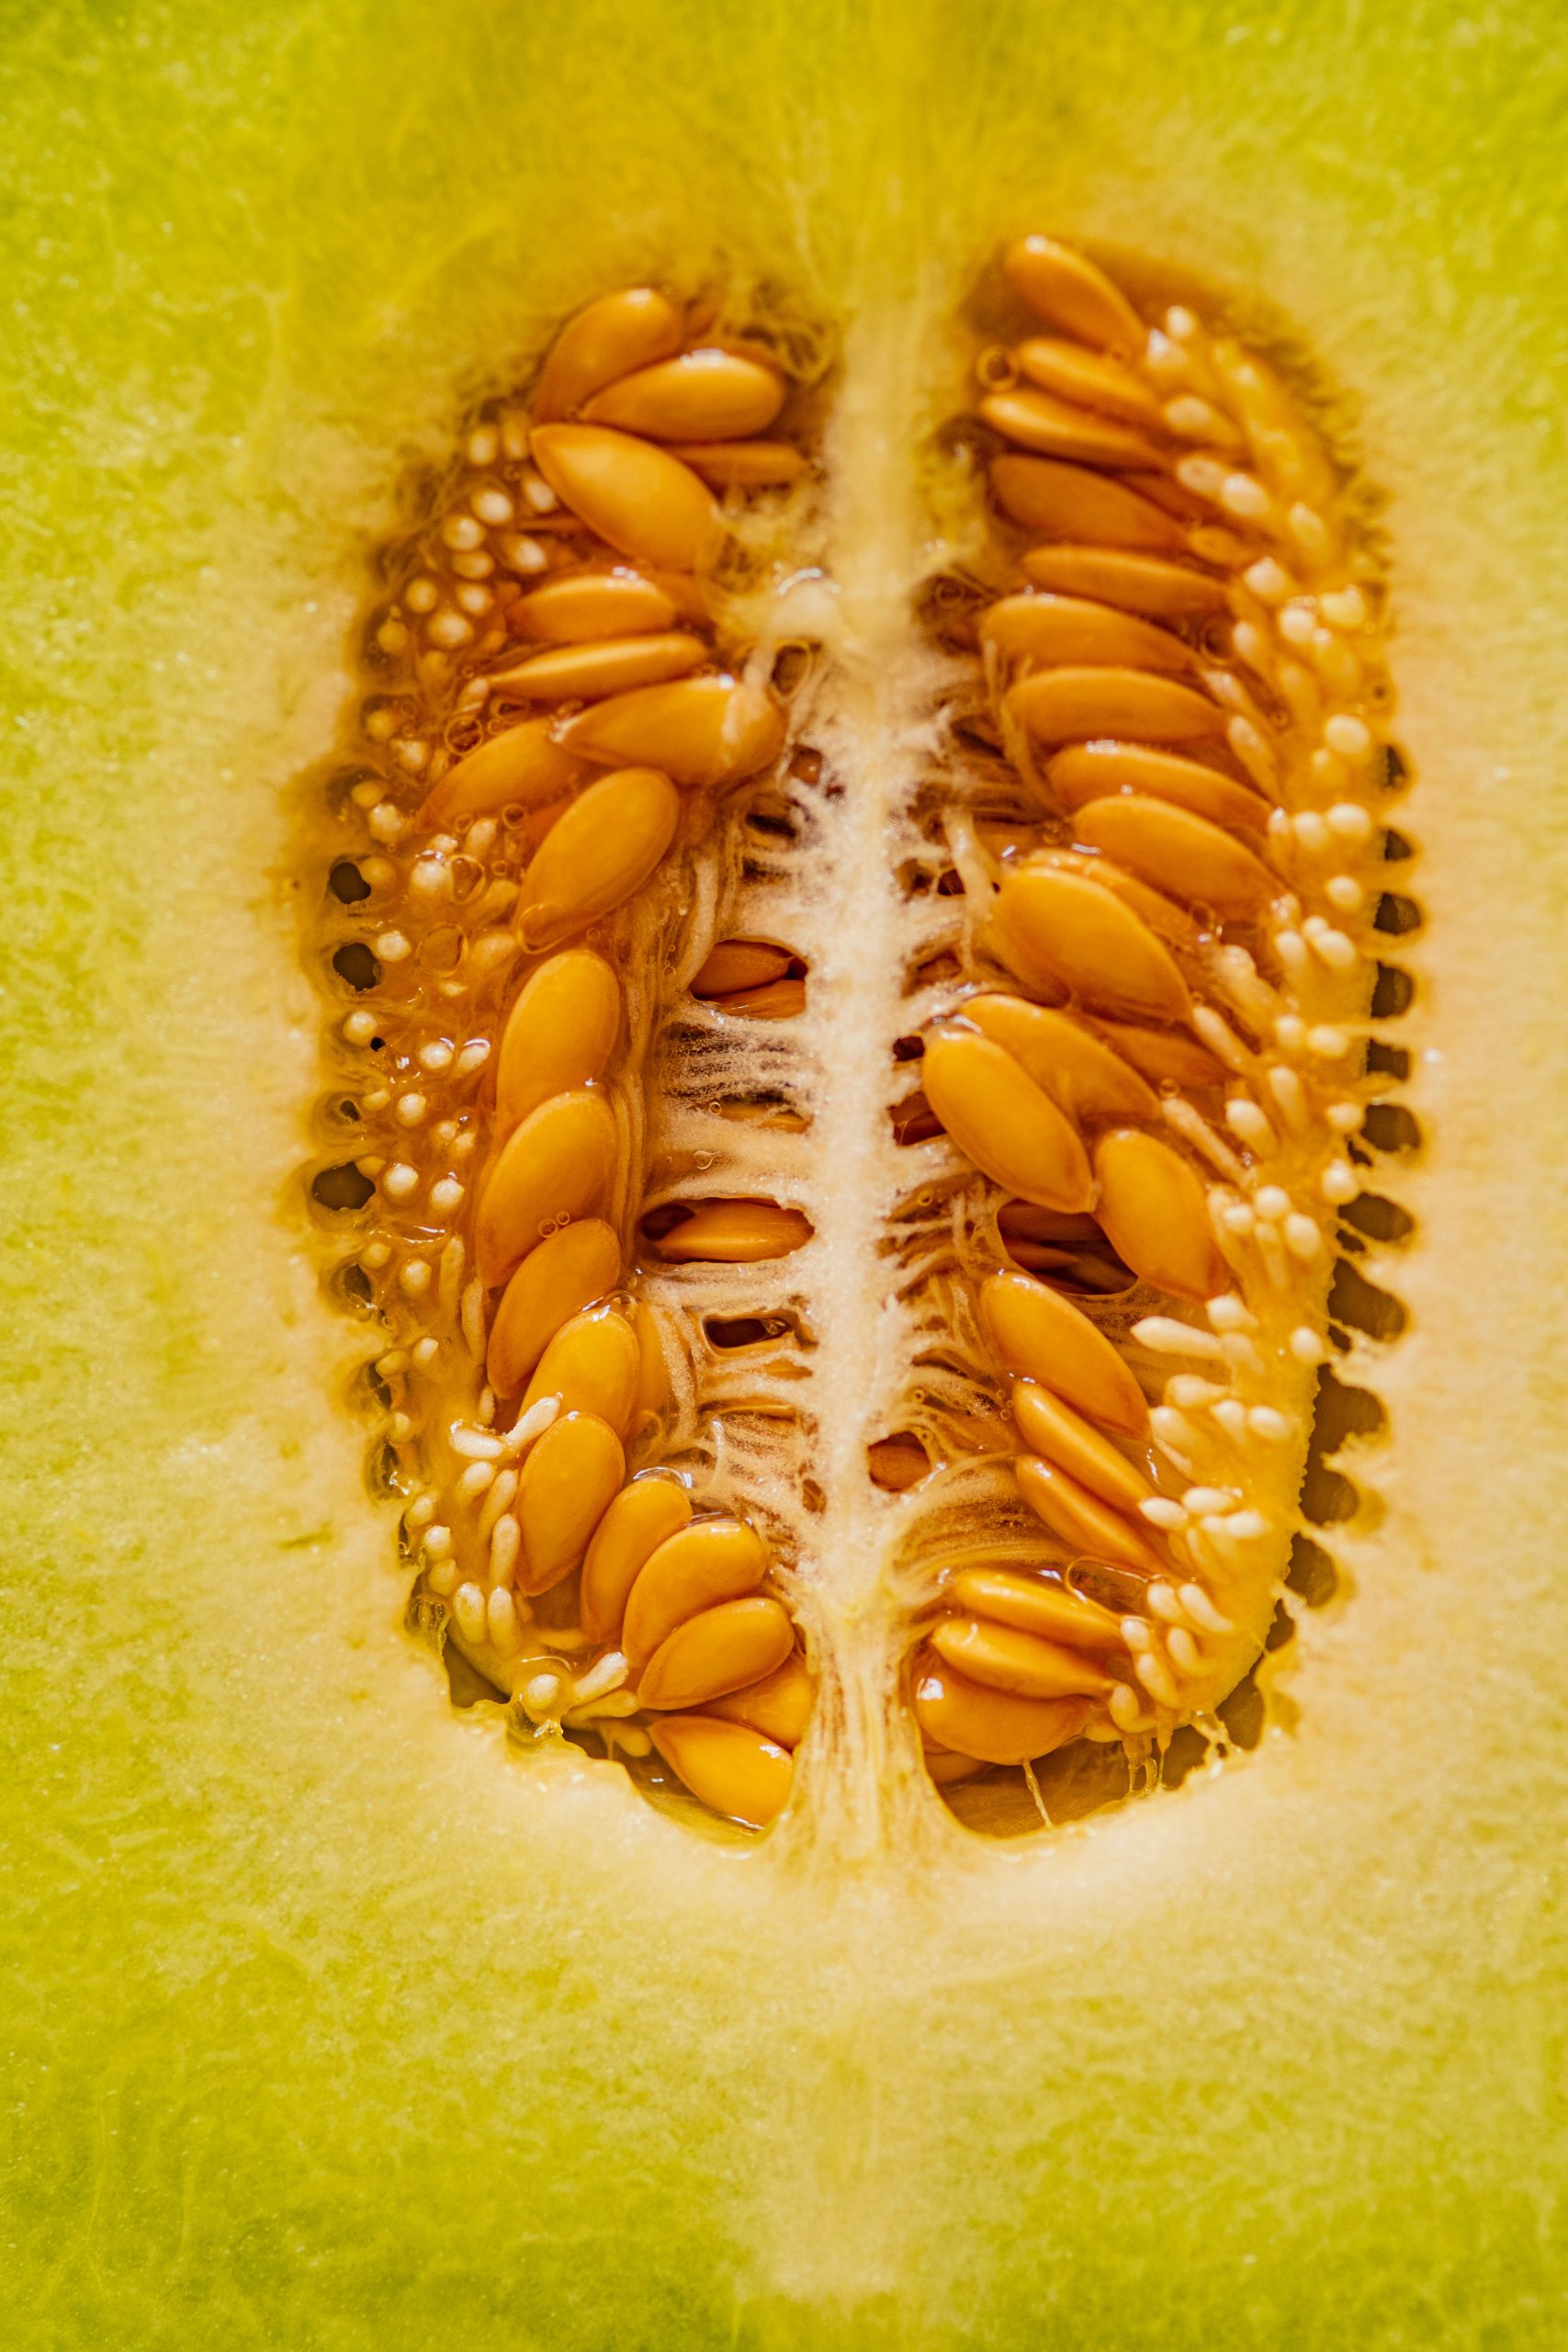 Can You Grow Cantaloupe From Store Bought Fruit?